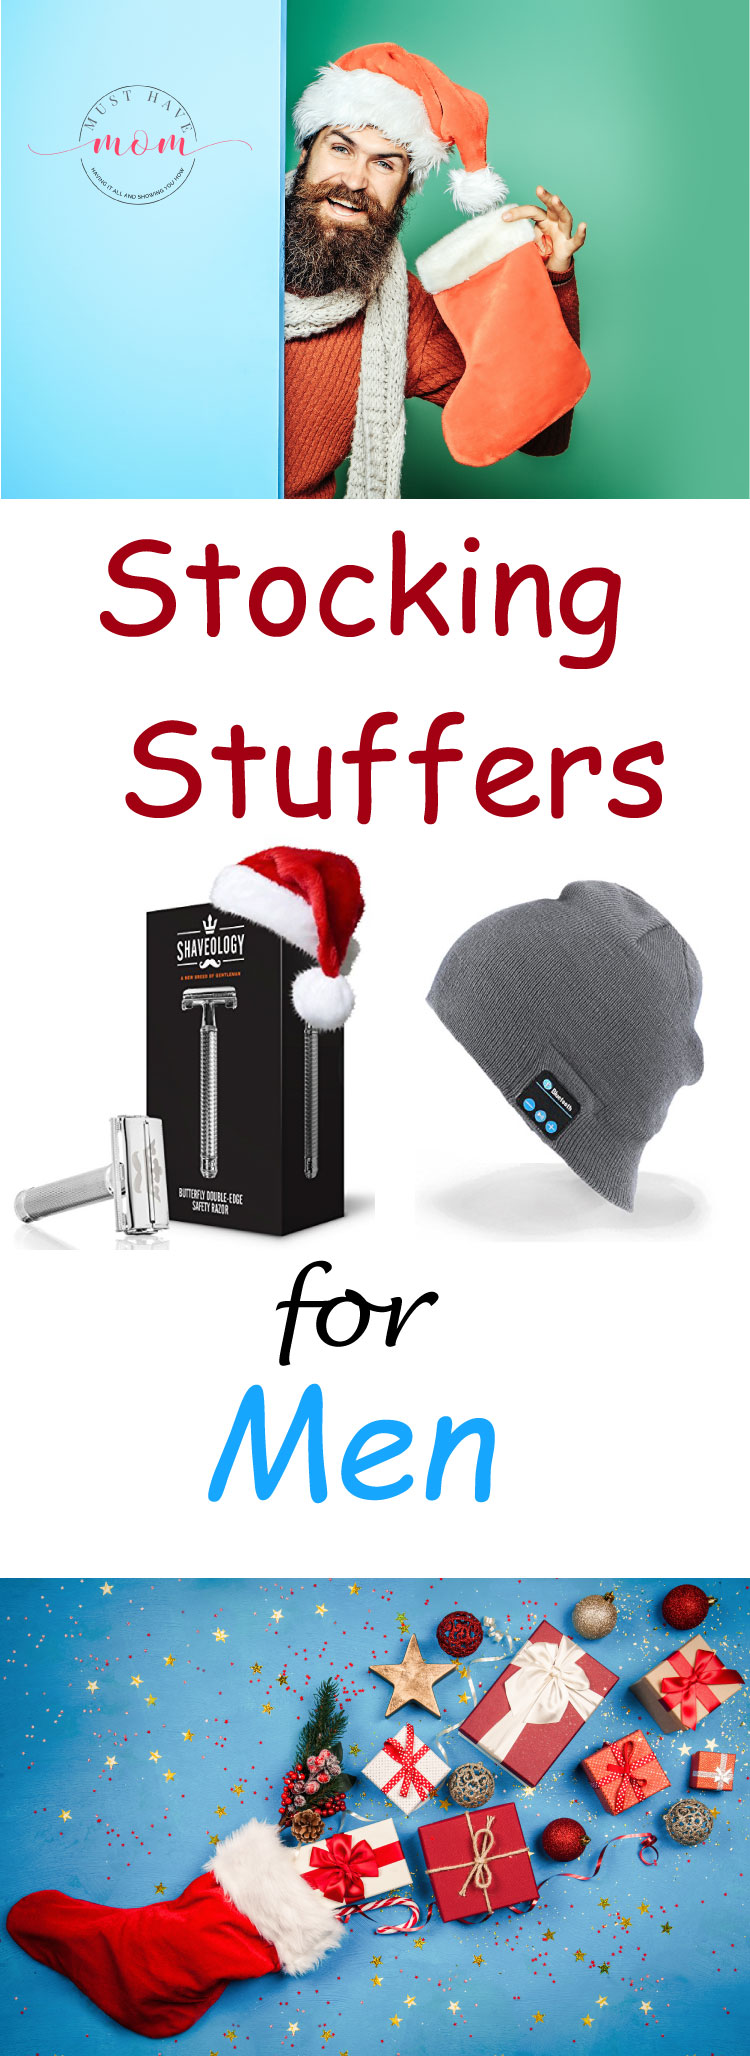 Figuring out a gift for any of the men in my life can seem like a impossible task.  These stocking stuffers for men are sure to delight anyone on your list.